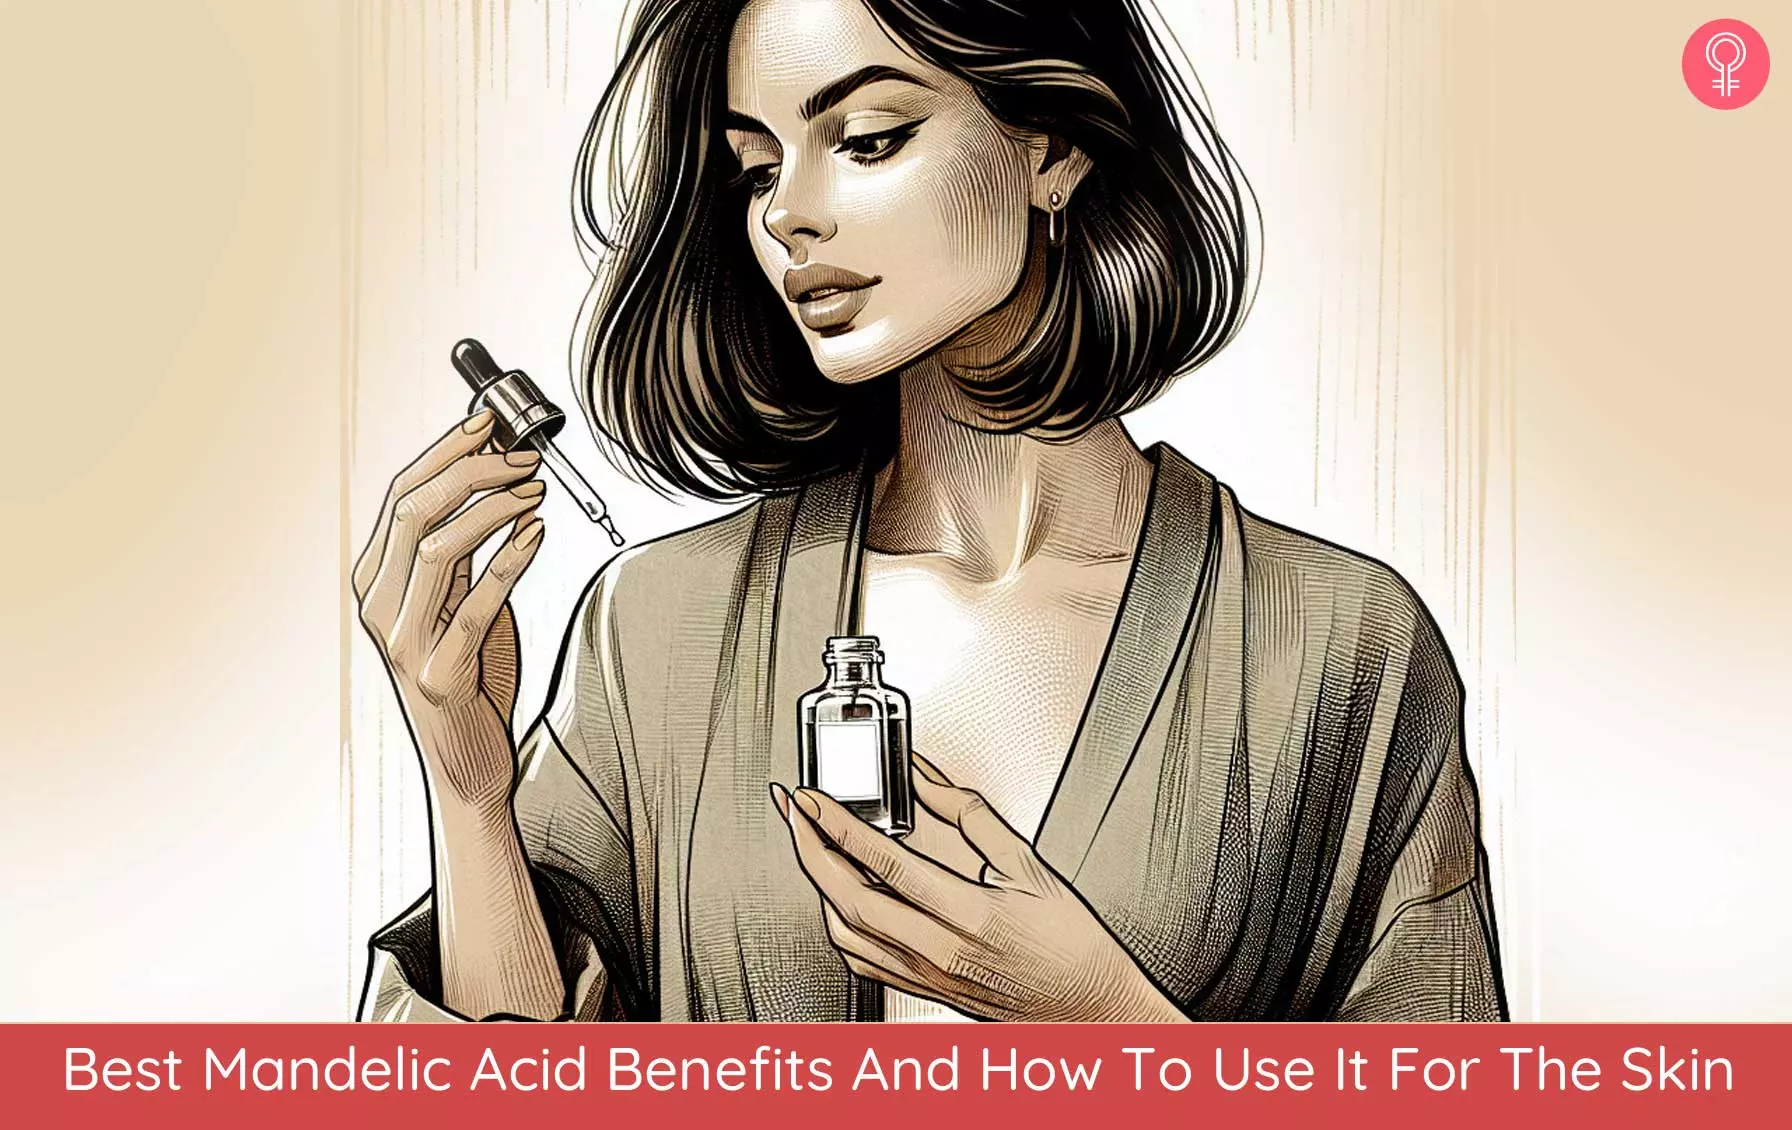 6 Best Mandelic Acid Benefits And How To Use It For The Skin